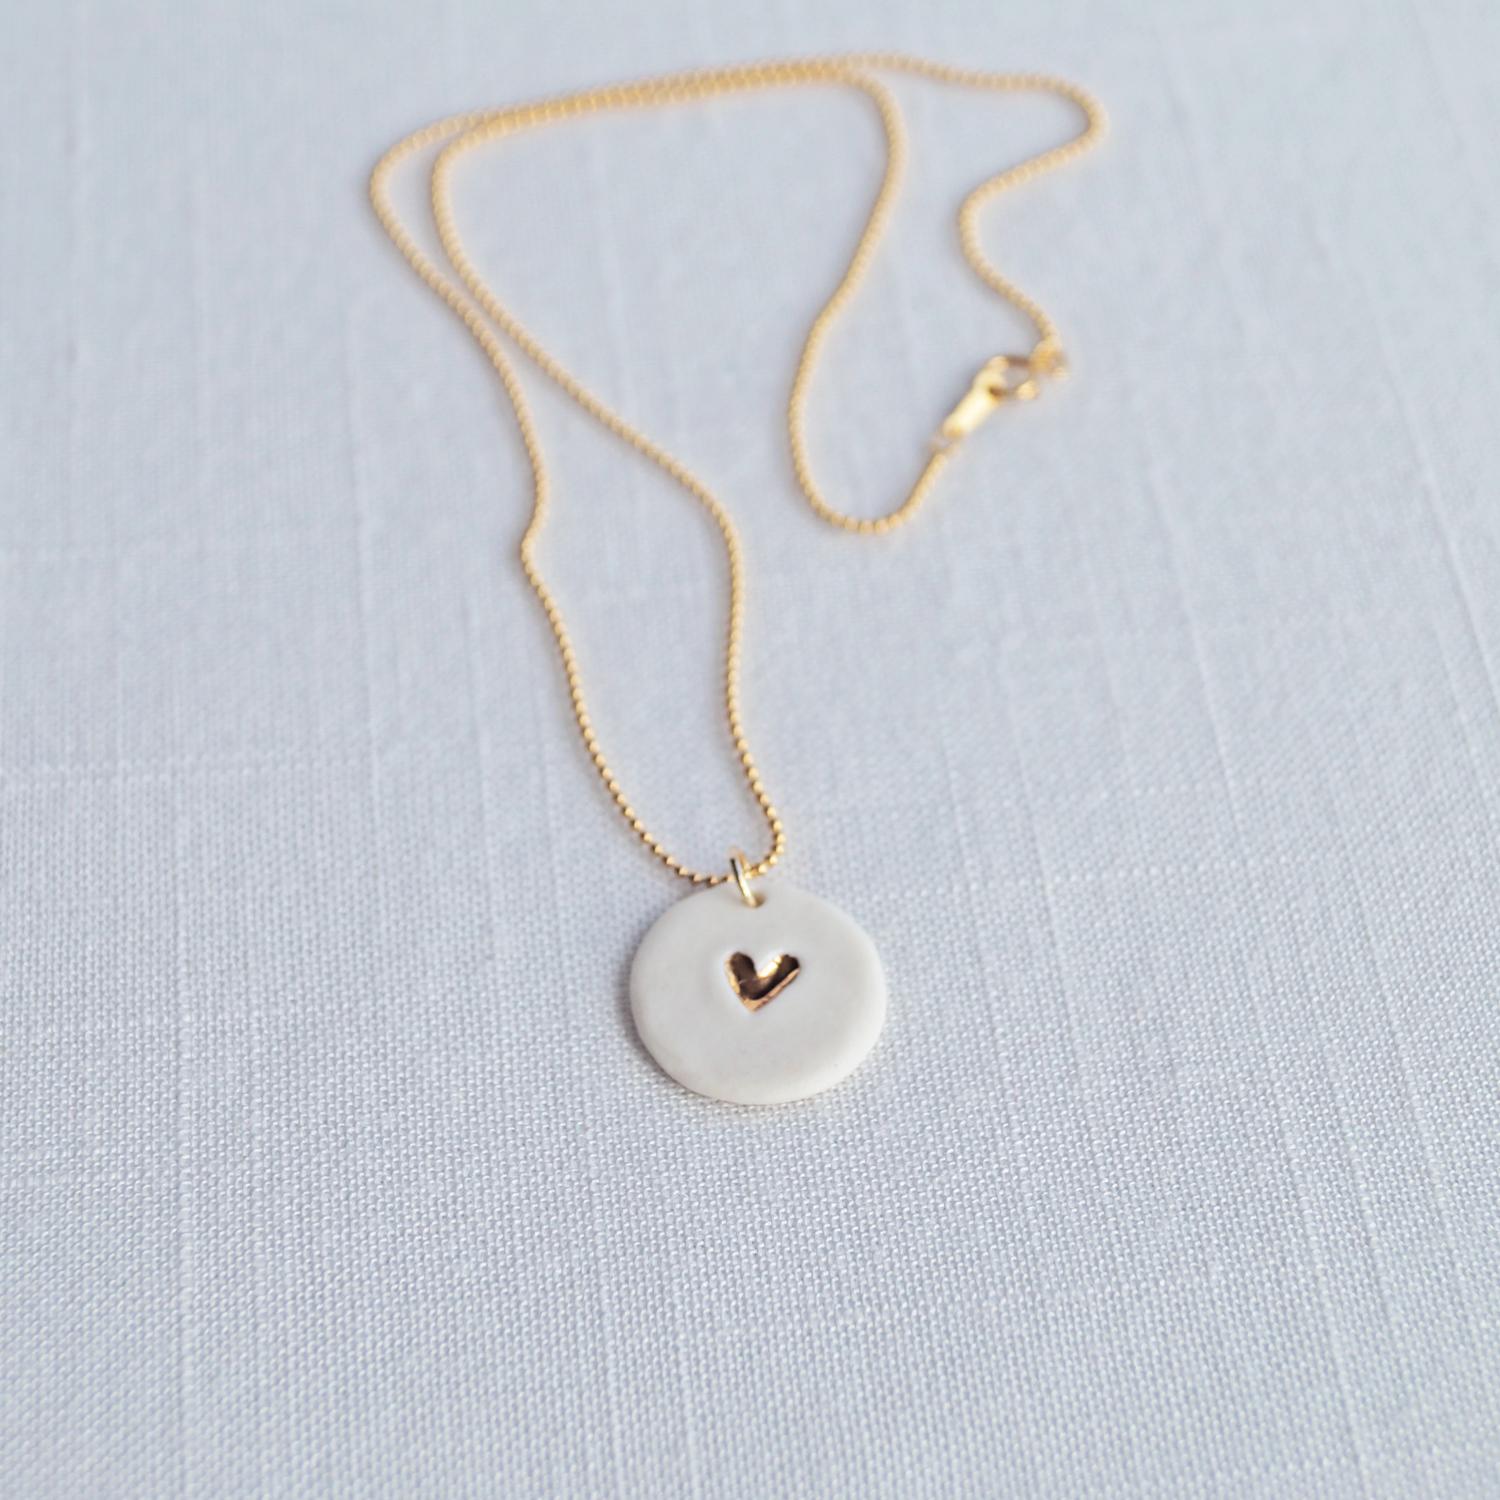 Love drop, love-drop, white porcelain, charm necklace, rondelle necklace, gold filled, bead chain, ball chain, VanillaKiln, 1